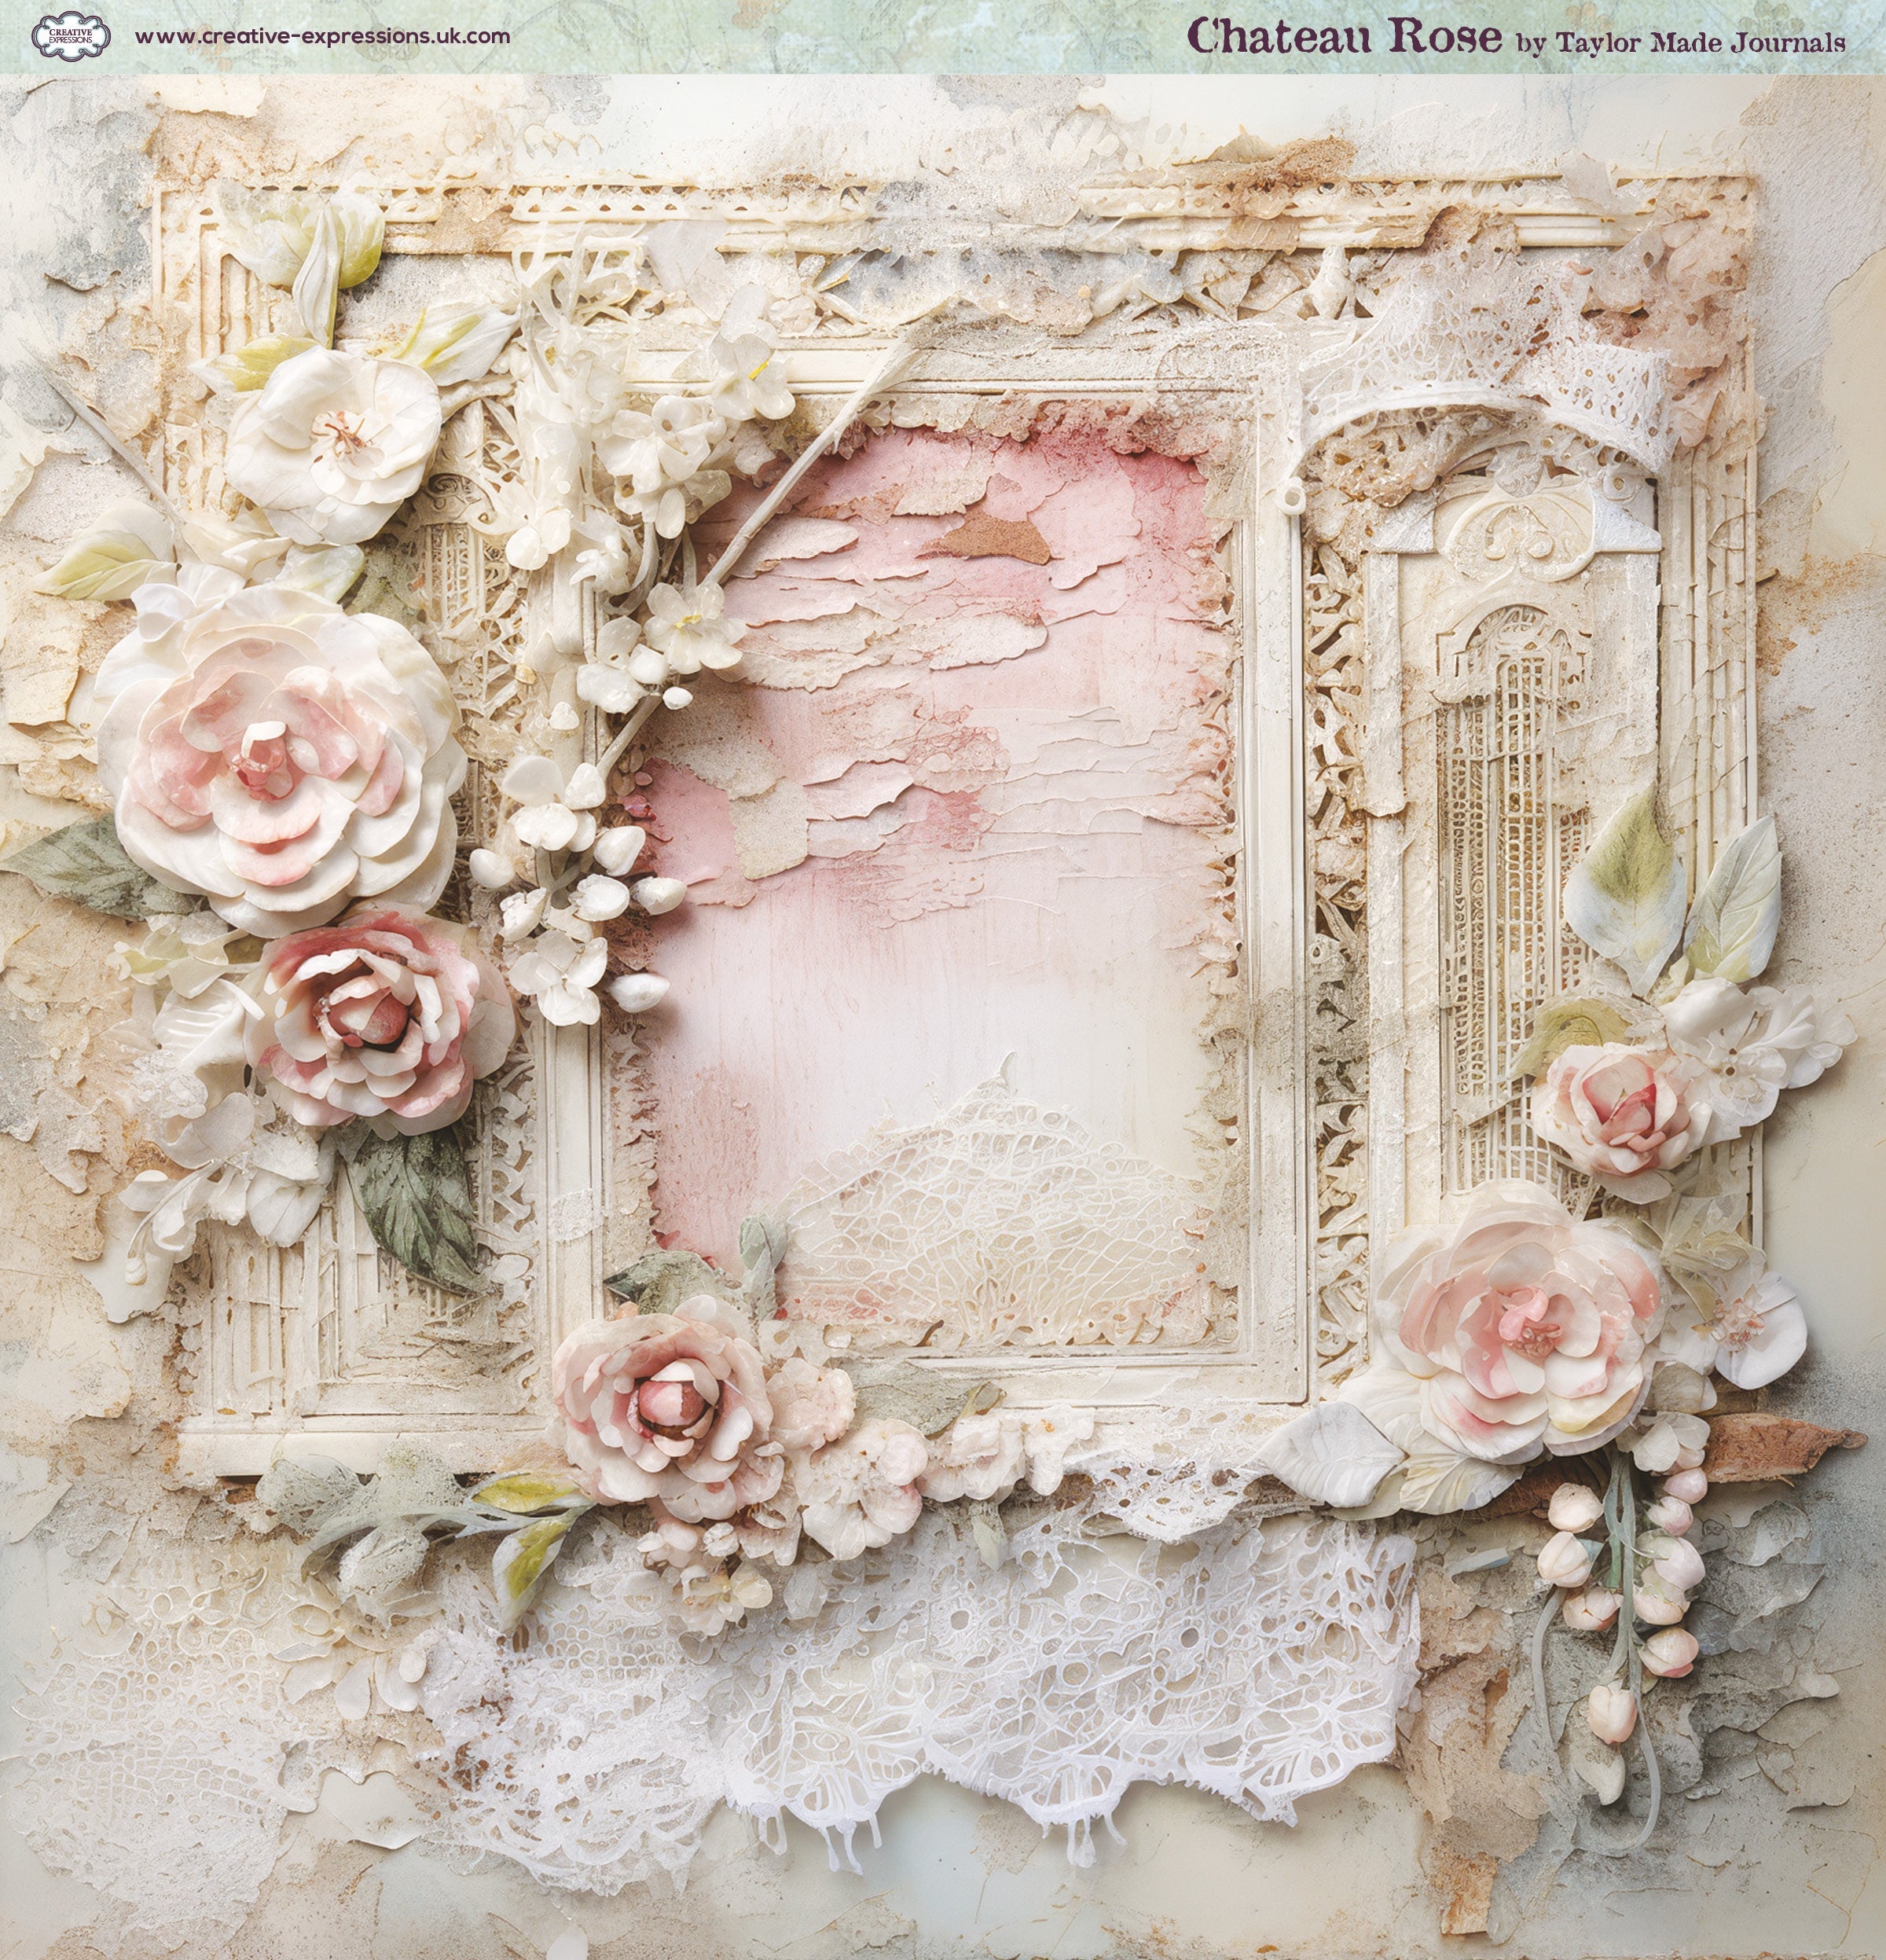 Creative Expressions Taylor Made Journals Chateau Rose 8 in x 8 in Paper Pad